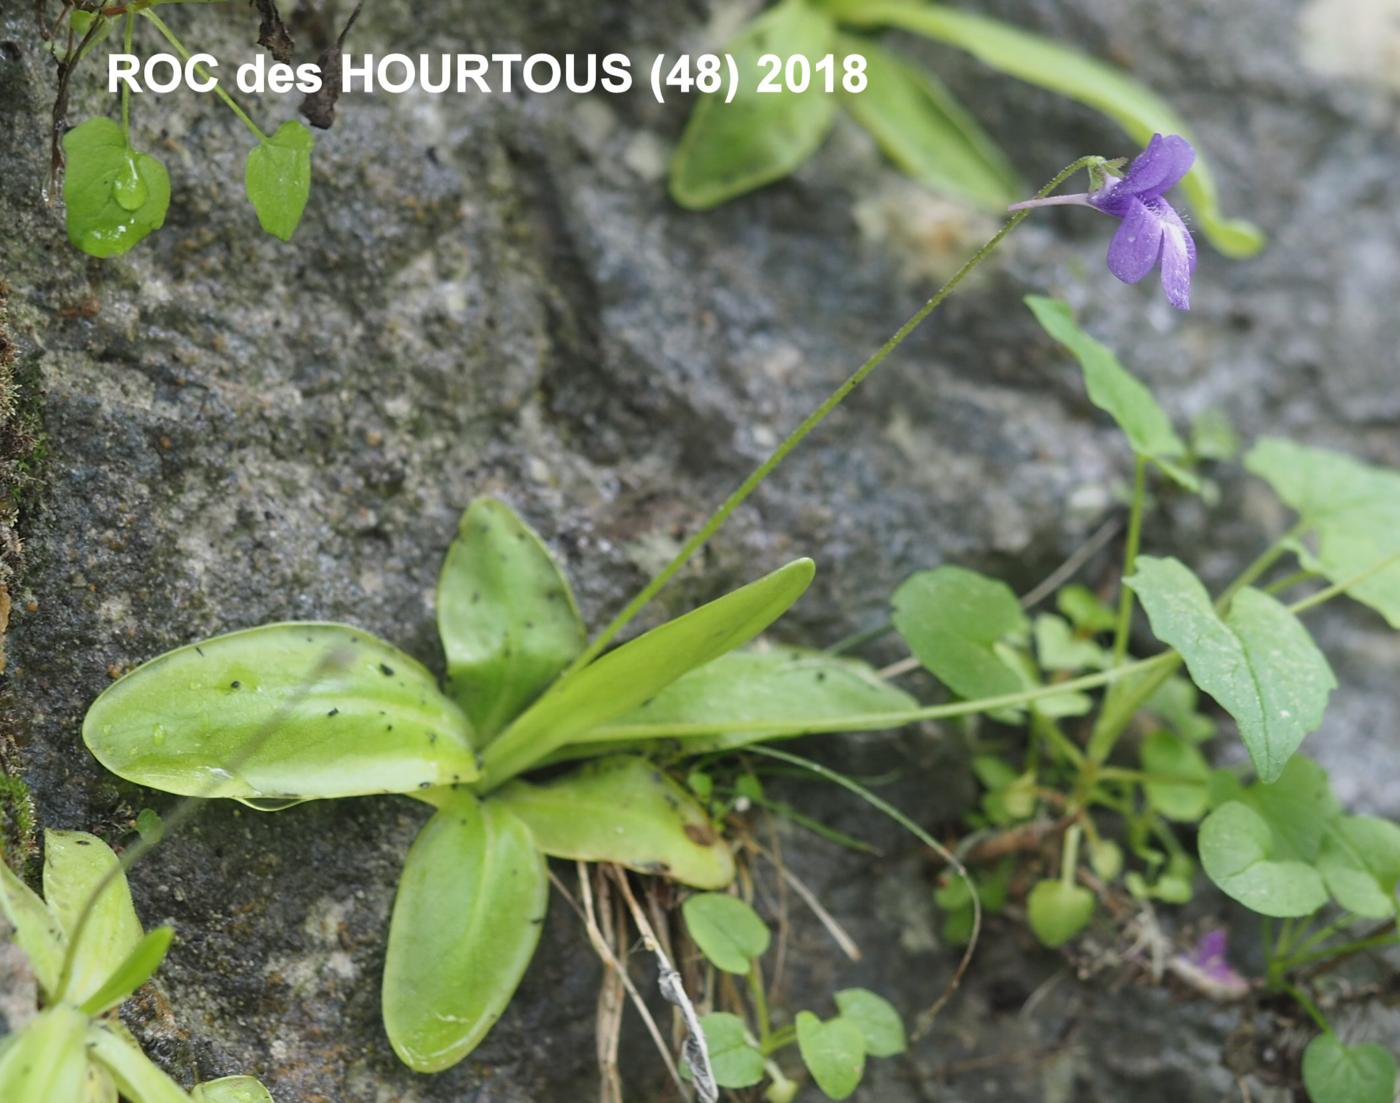 Butterwort [of the causses] plant